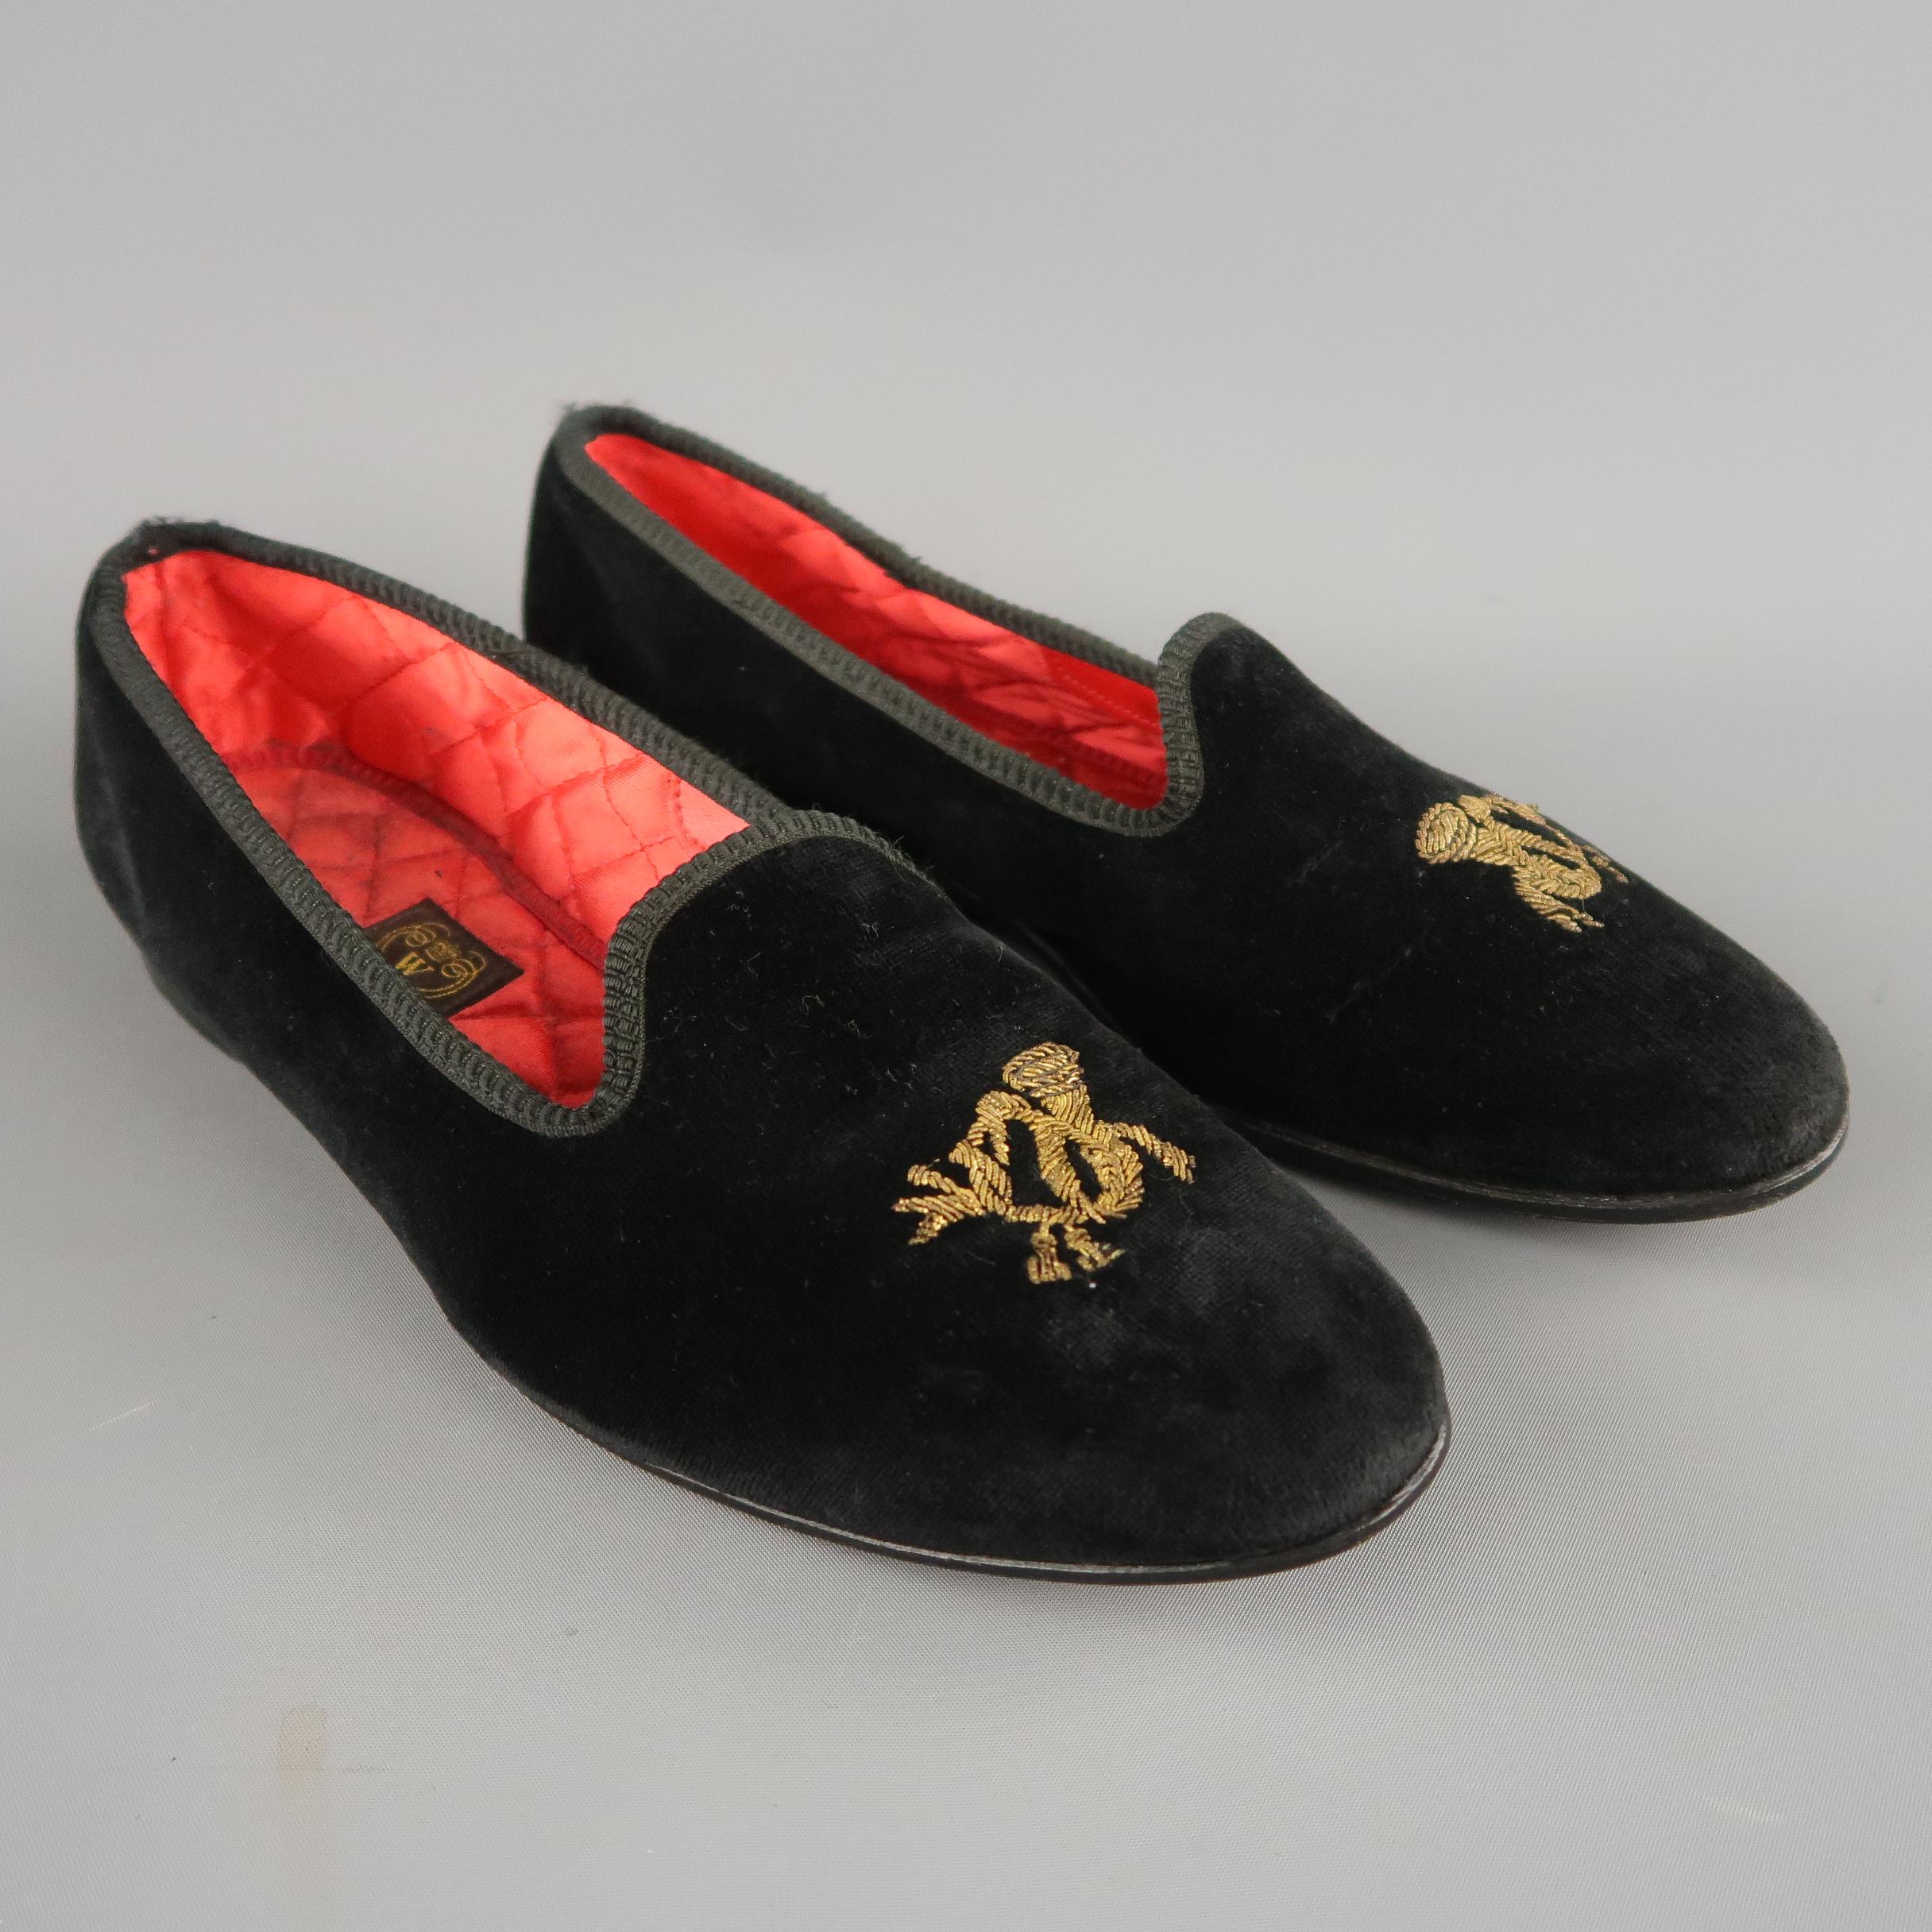 Vintage WATHNE loafer slippers come in black velvet with textured piping, red quilted liner, and gold embroidered horn motif. Hand Made in England.
 
Good Pre-Owned Condition.
Marked: 9.5
 
Outsole: 11.25 x 3.75 in.